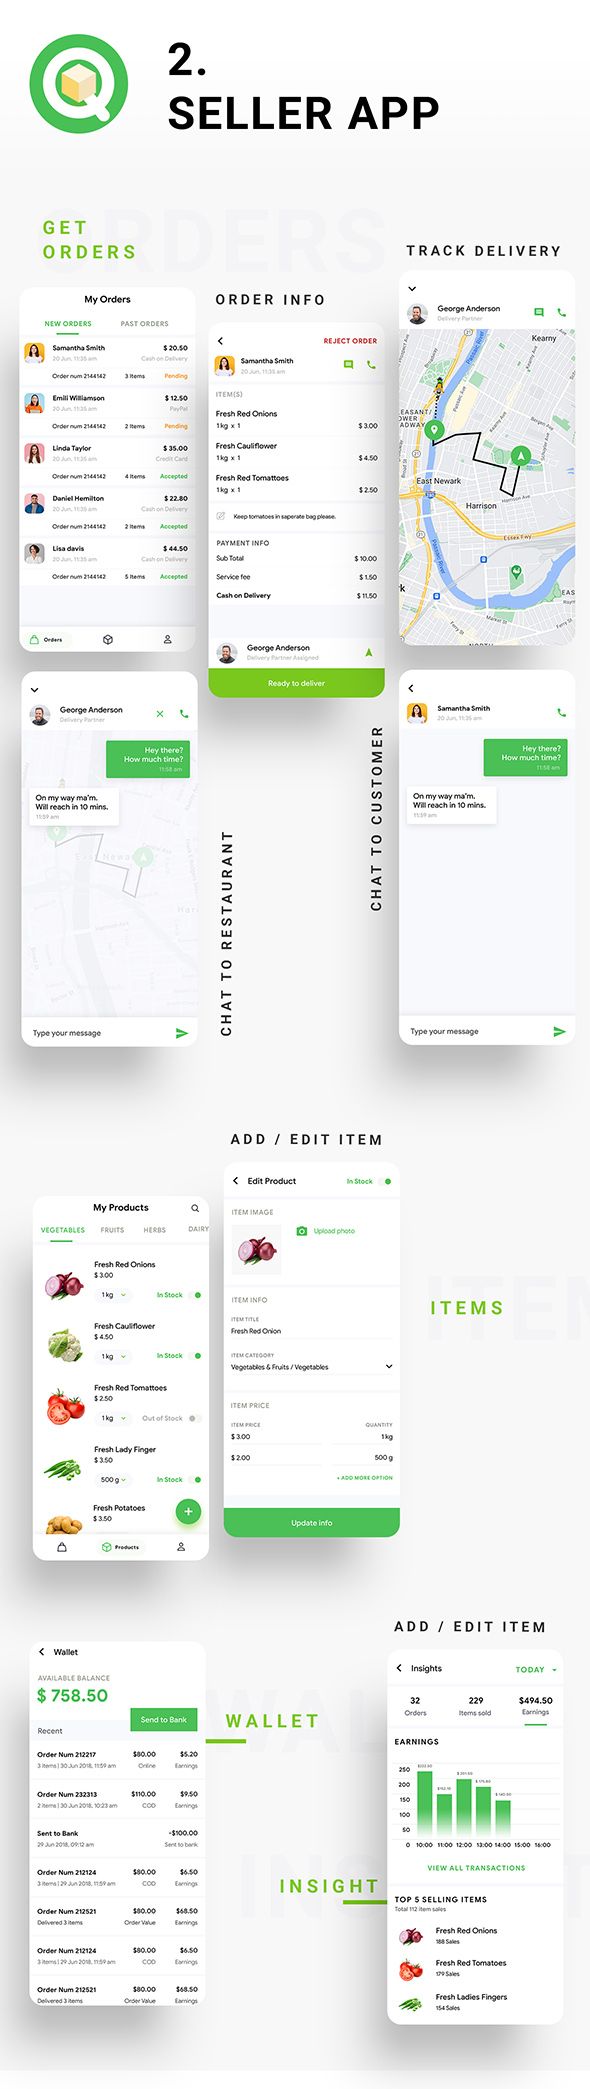 6 App Template| eCommerce Food Grocery Delivery App| Cab Booking| Peer 2 Peer Delivery App| DeliQ - 5